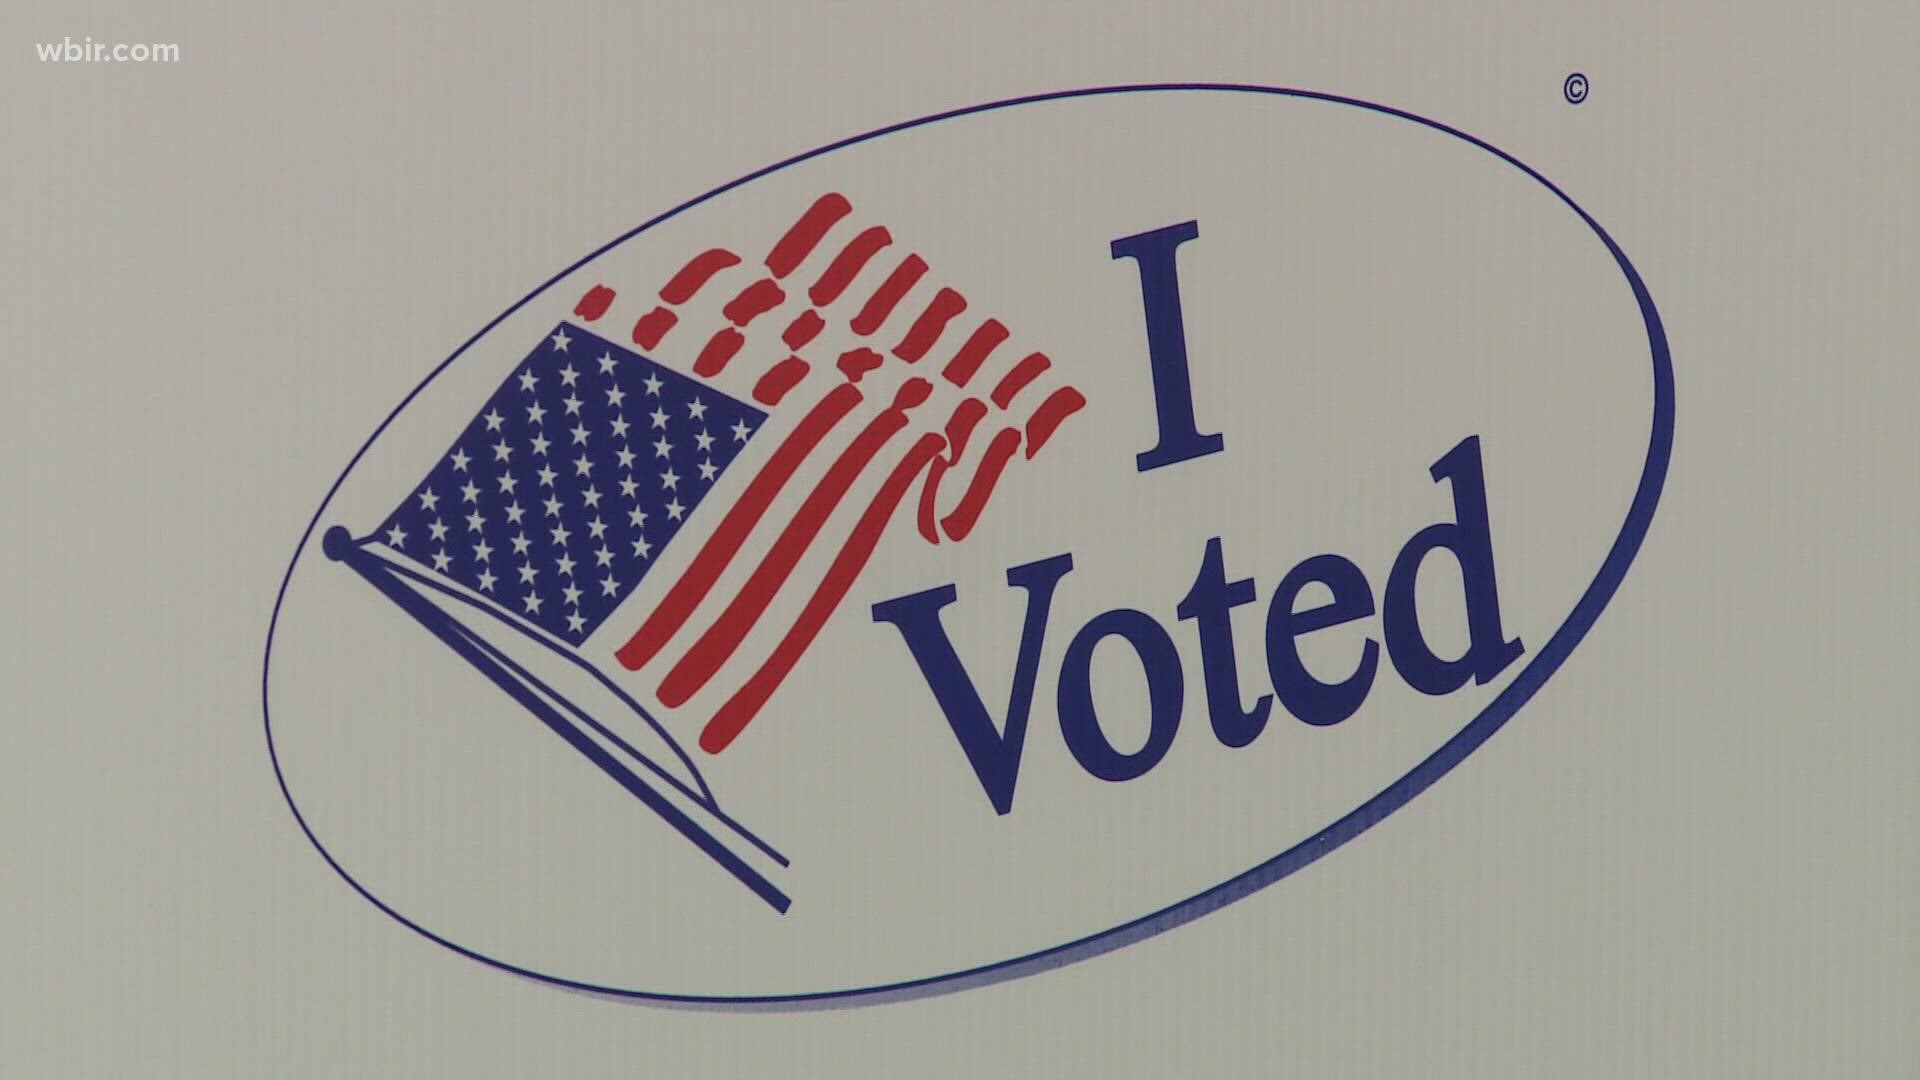 All 10 early voting locations will be open on Good Friday.